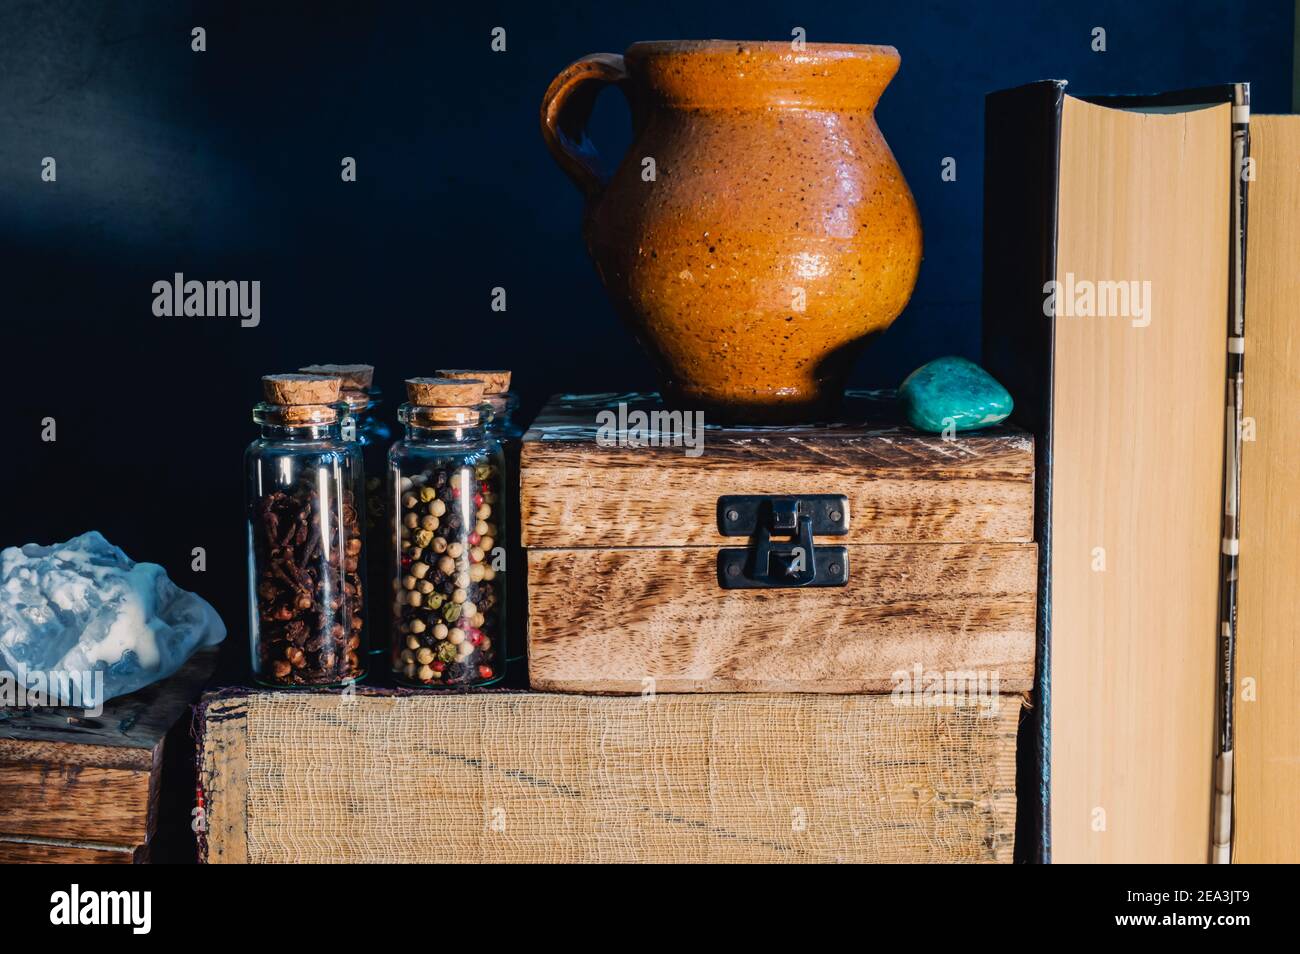 Still life image of books, wooden boxes, glass stopper bottles with spices an earthenware jug and semi precious stones in warm light Stock Photo